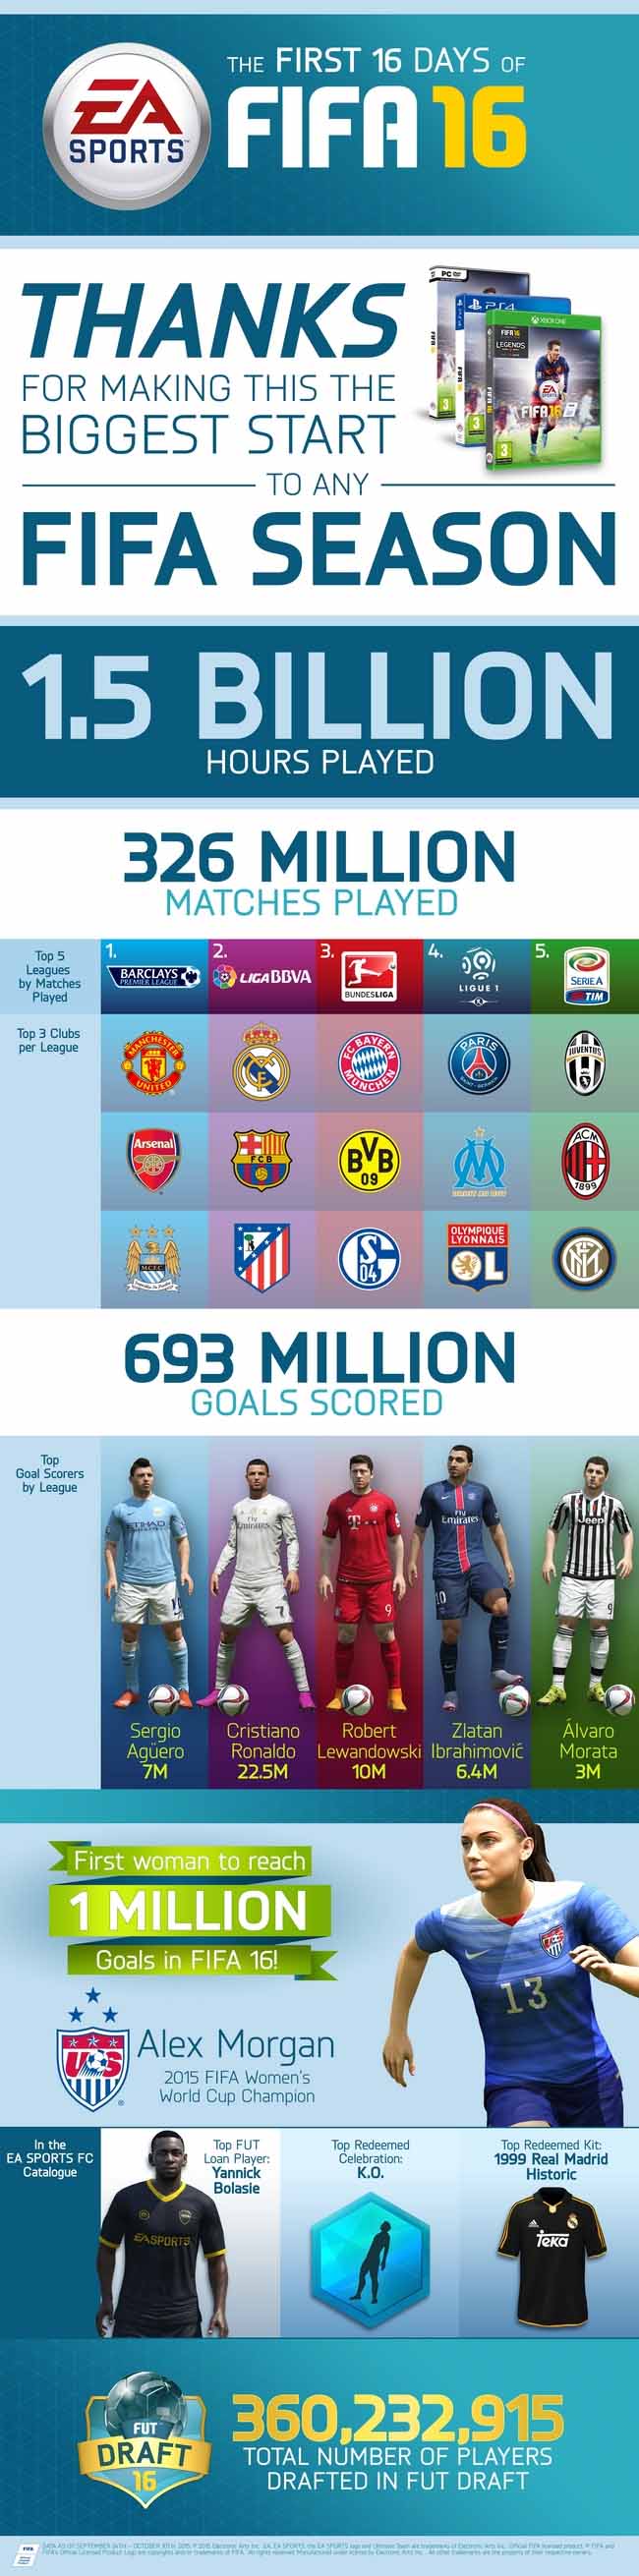 The First Days of FIFA 16